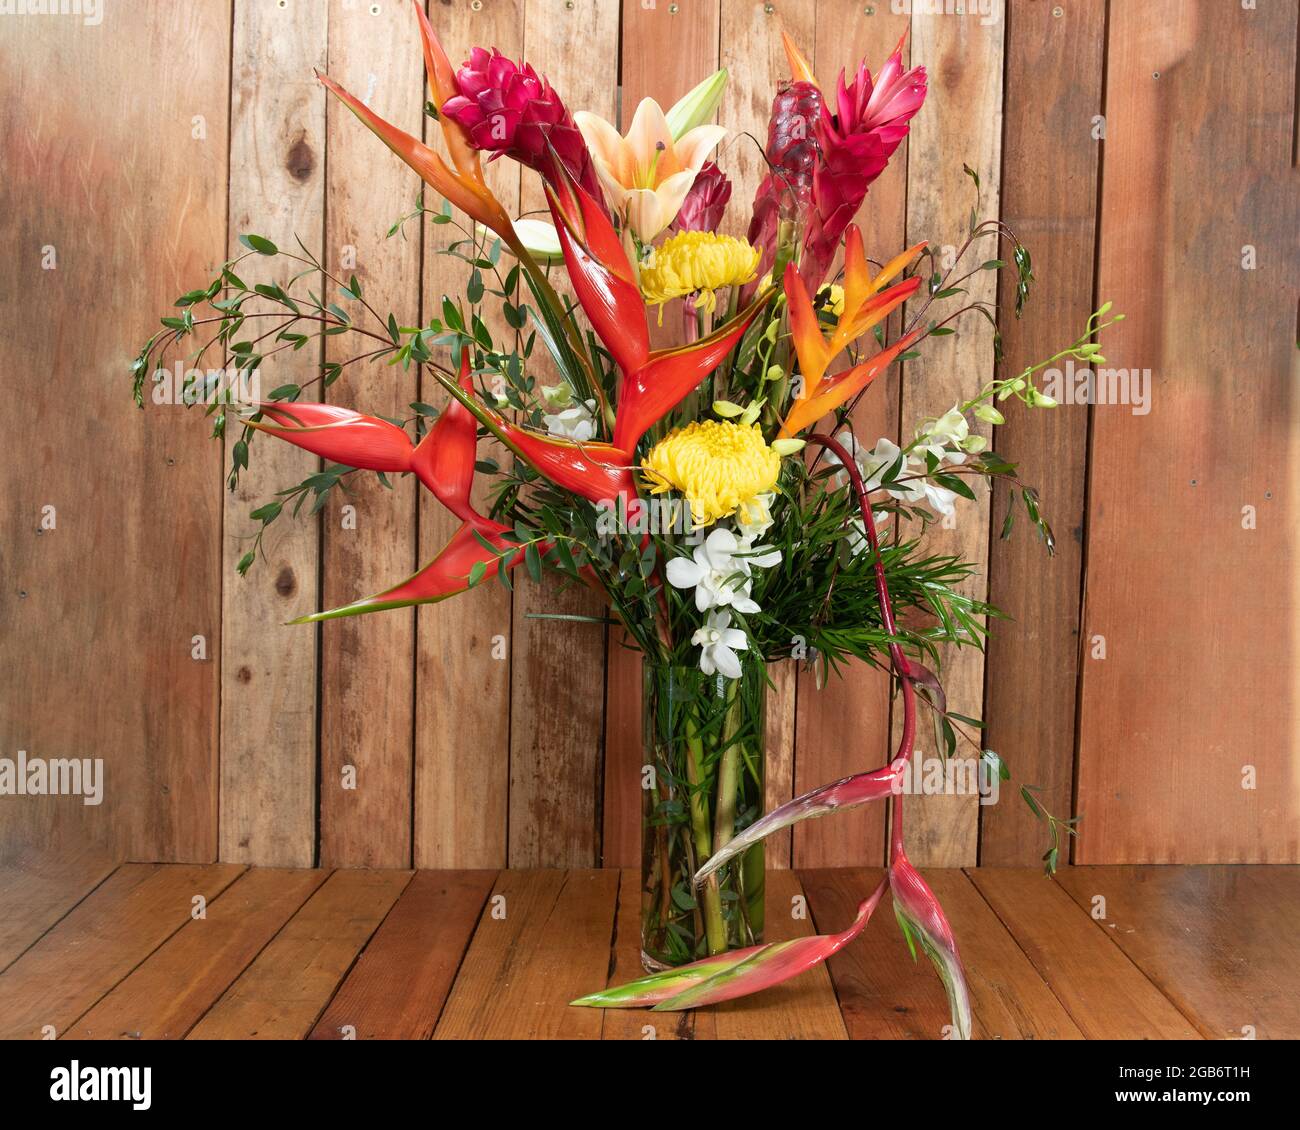 Beautiful bouquet of arranged yellow mums, orange stargazers, and birds of paradise given as an emotional sentiment. Stock Photo